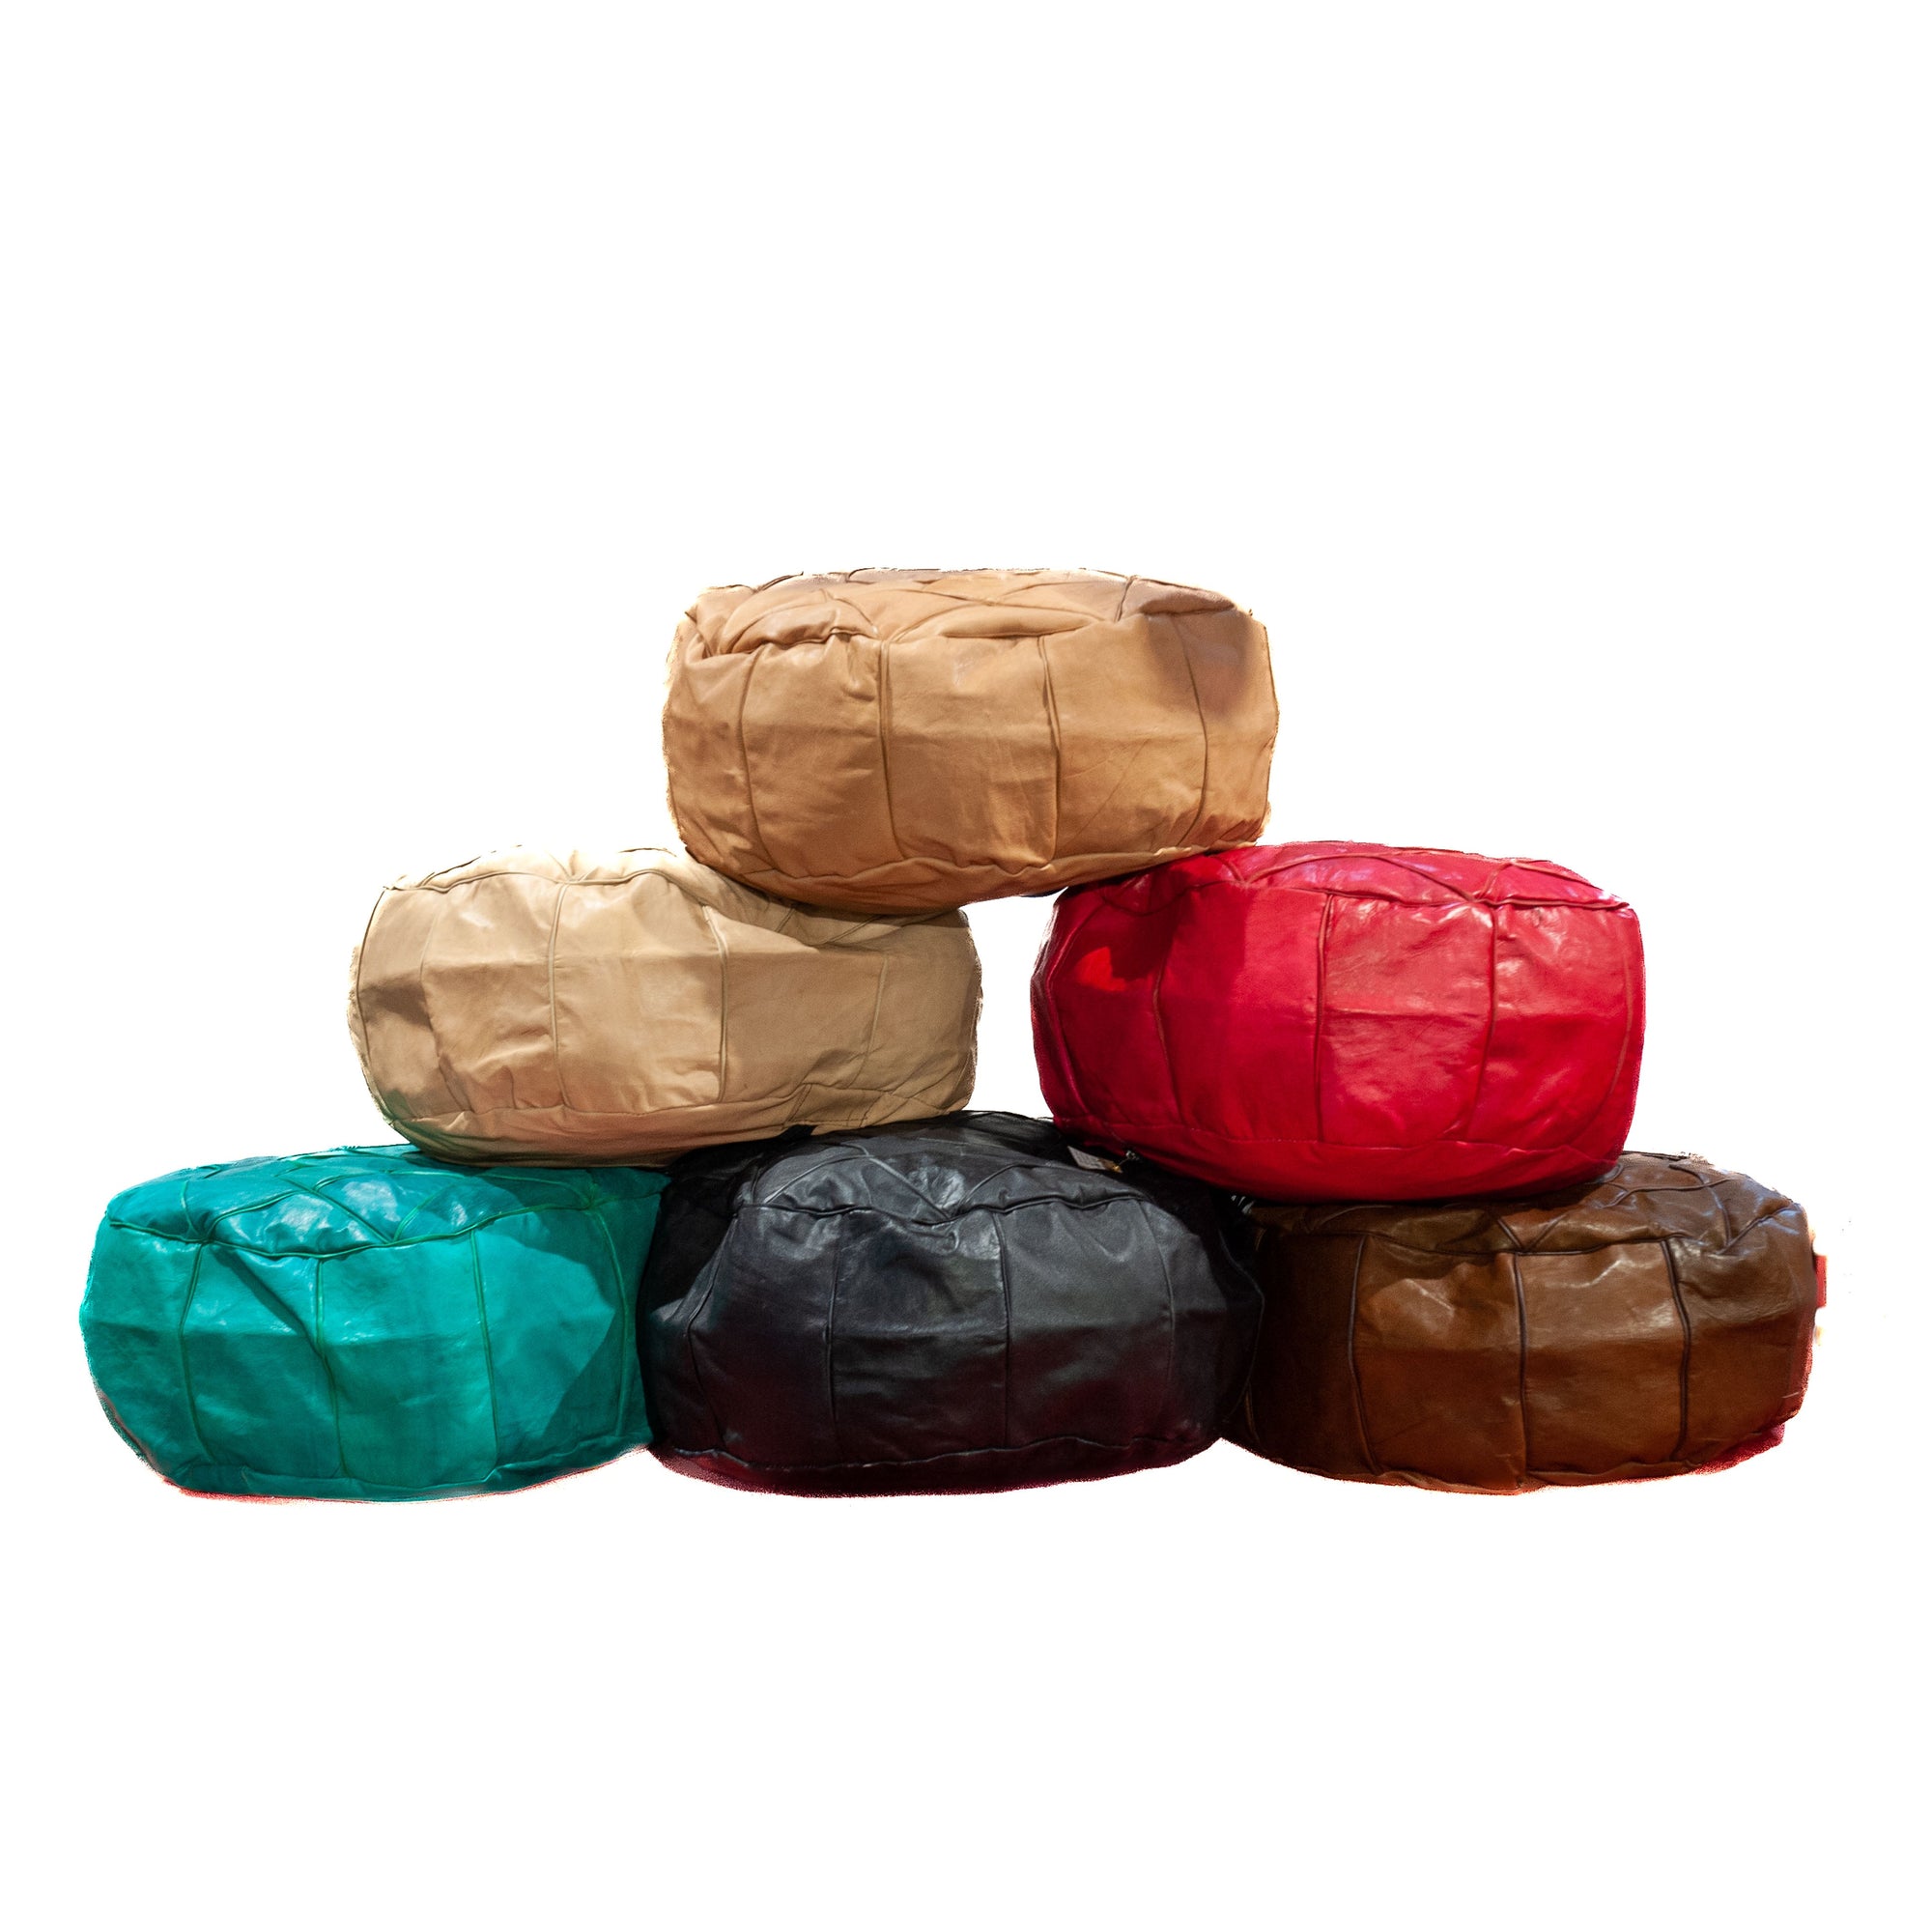 Egyptian Leather Smooth Pouf - Small